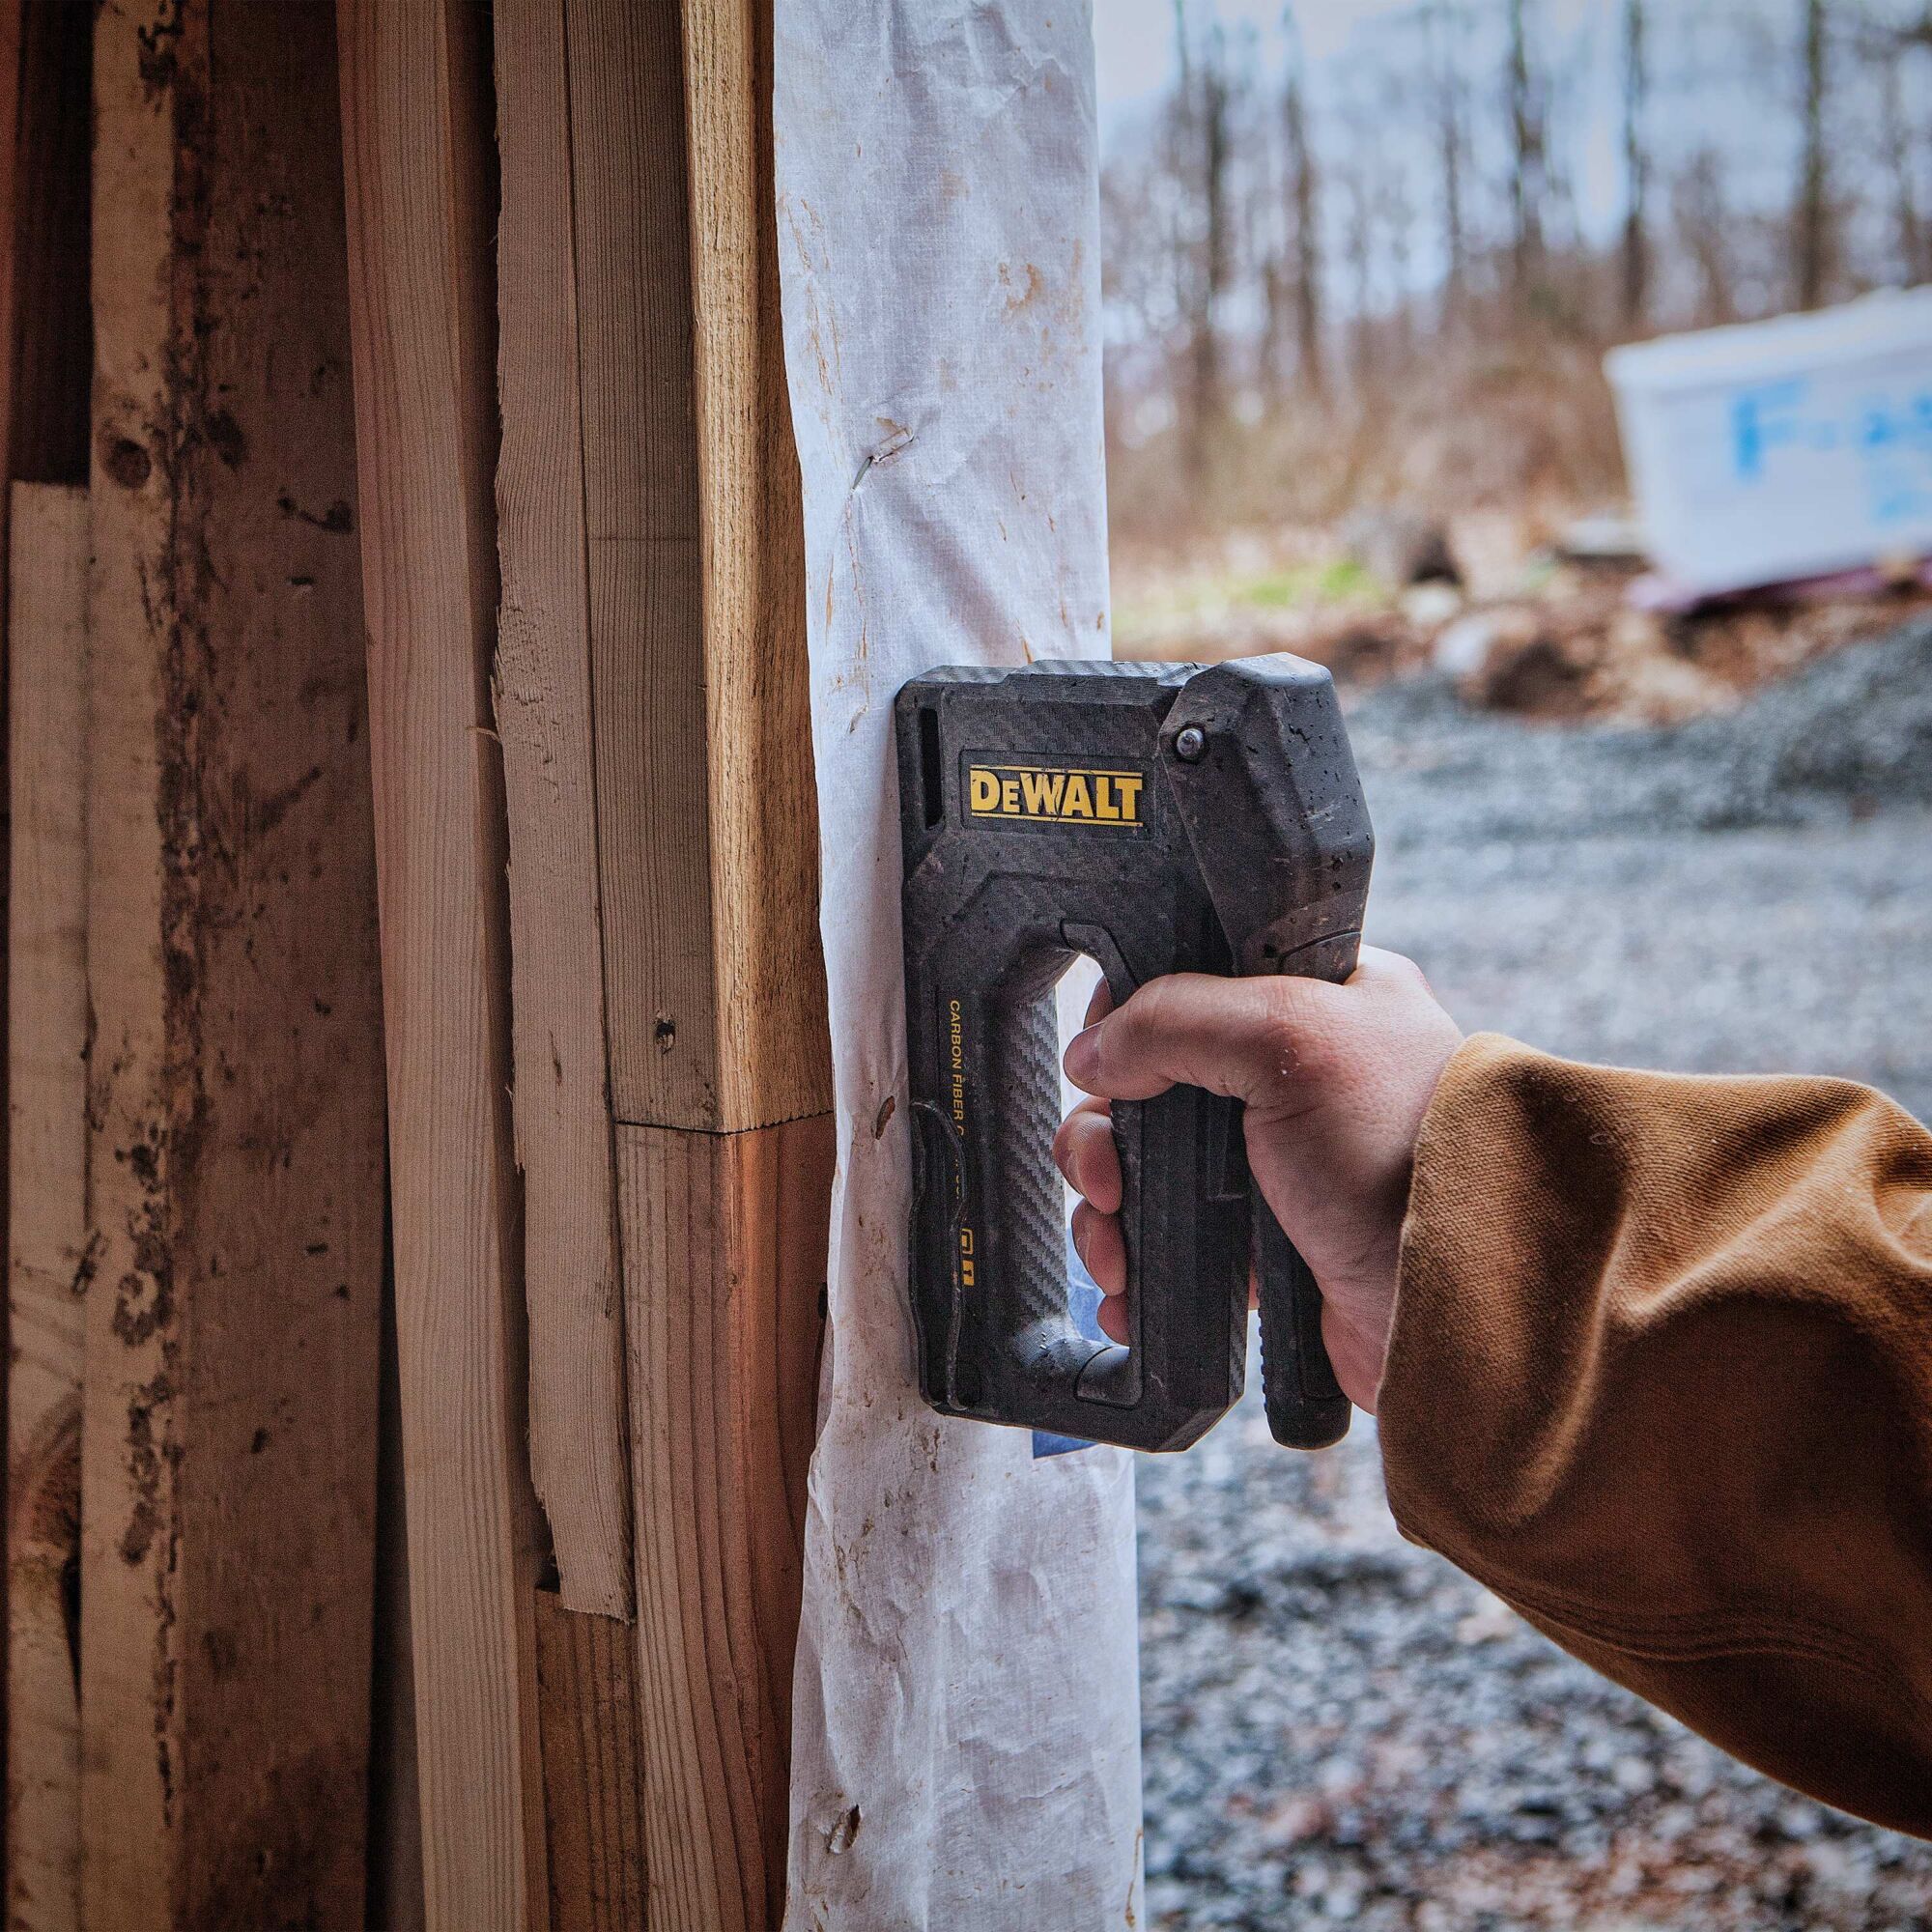 Carbon Fiber Composite Staple Gun being used to staple underlay on  wall outside.